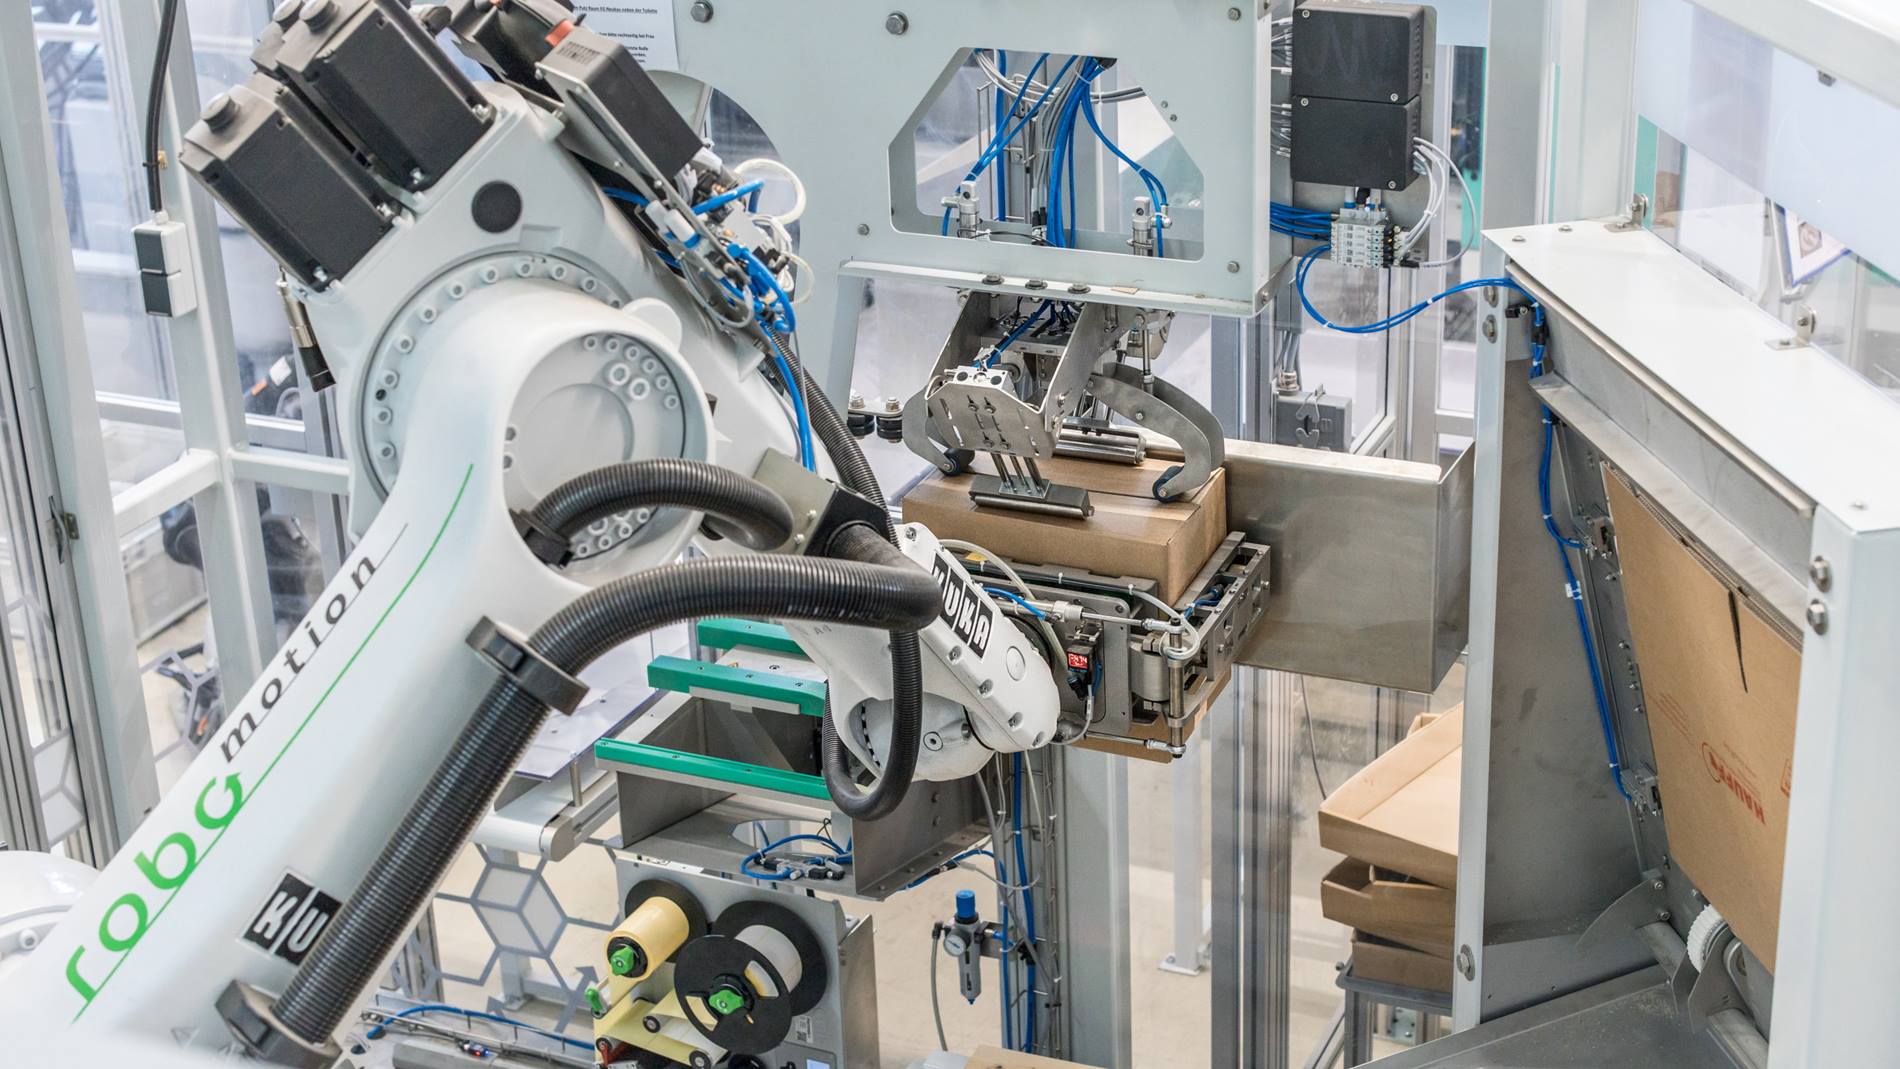 From plastic injection molding to palletizing with robots.